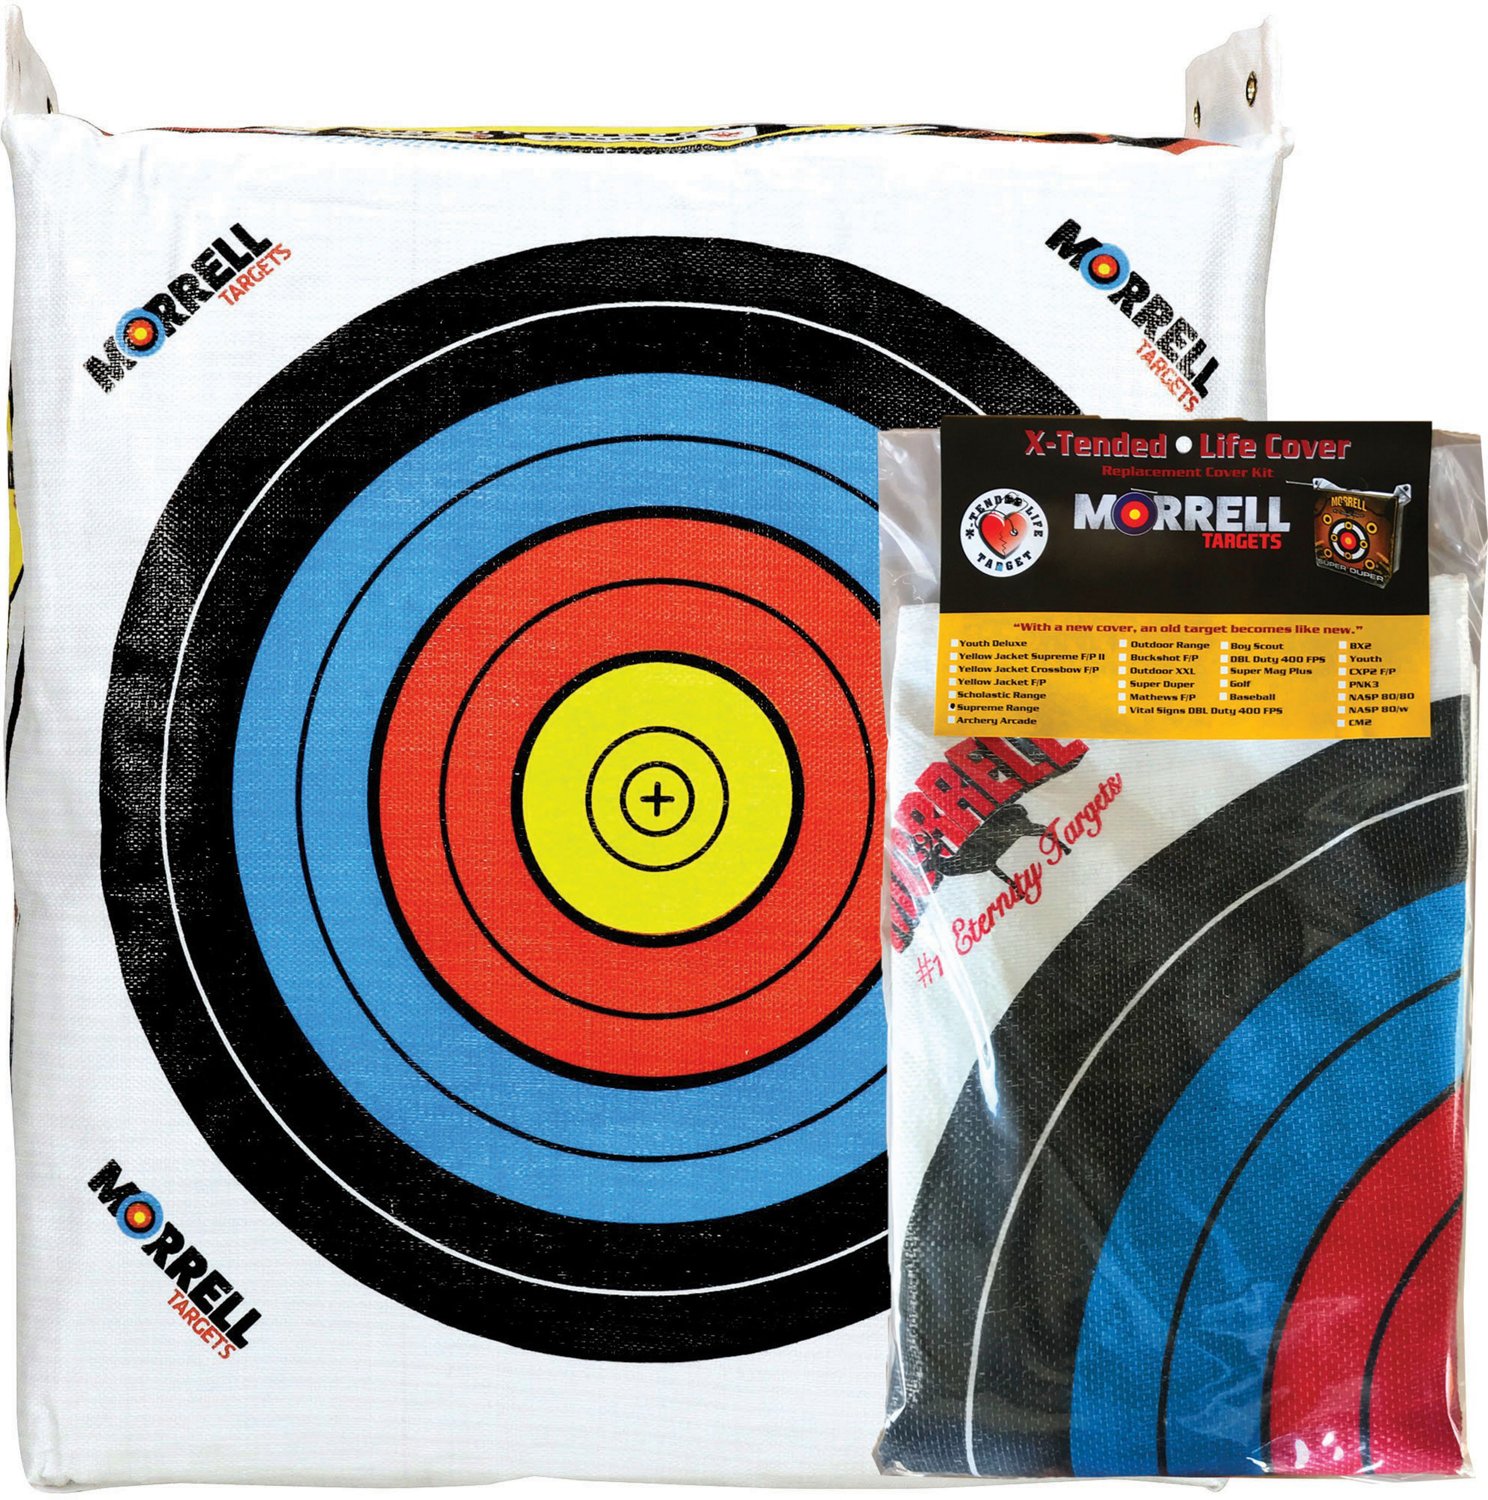 New Morrell Outdoor Range Xxl Field Point Archery Target REPLACEMENT COVER 